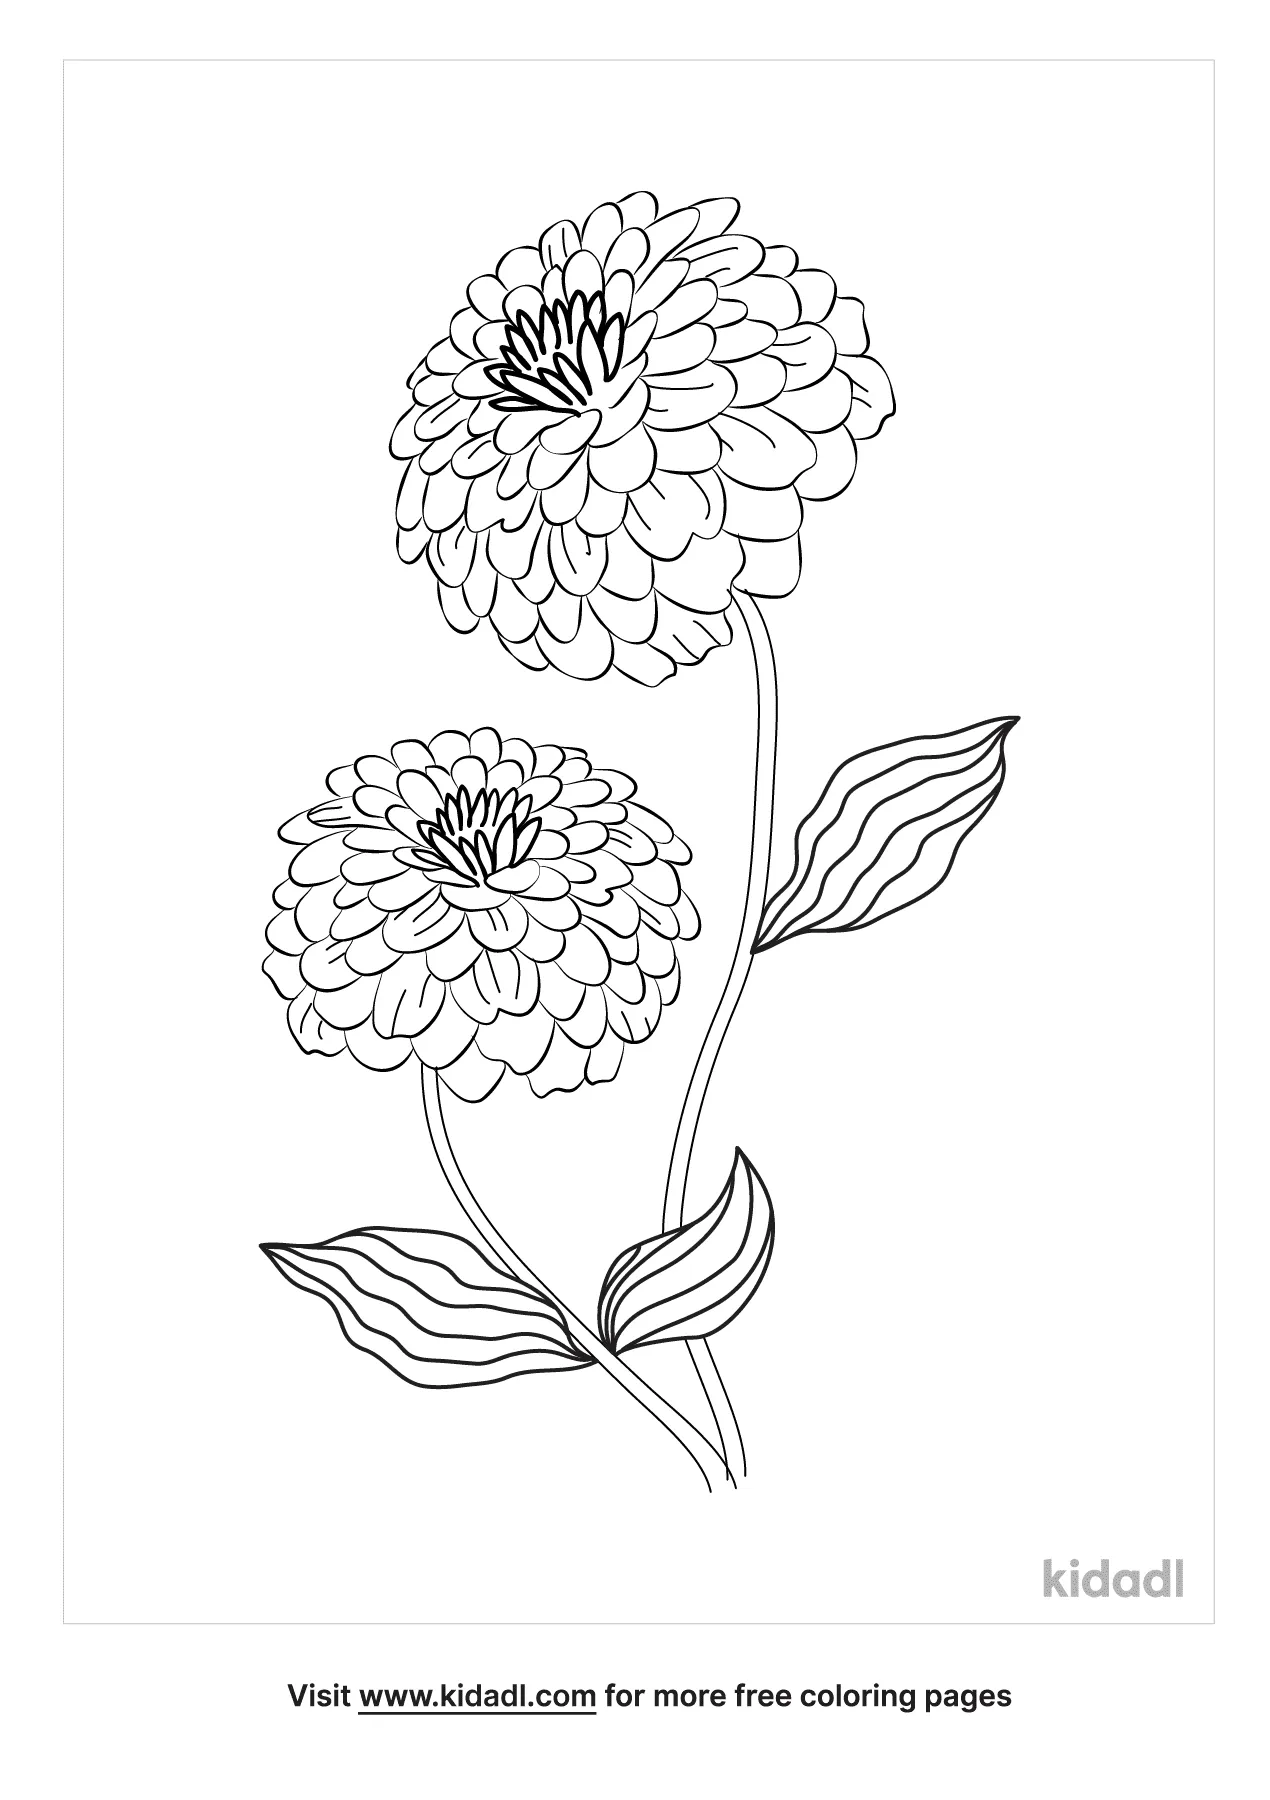 Zinnia Coloring Pages   Free Flowers Coloring Pages   Kidadl